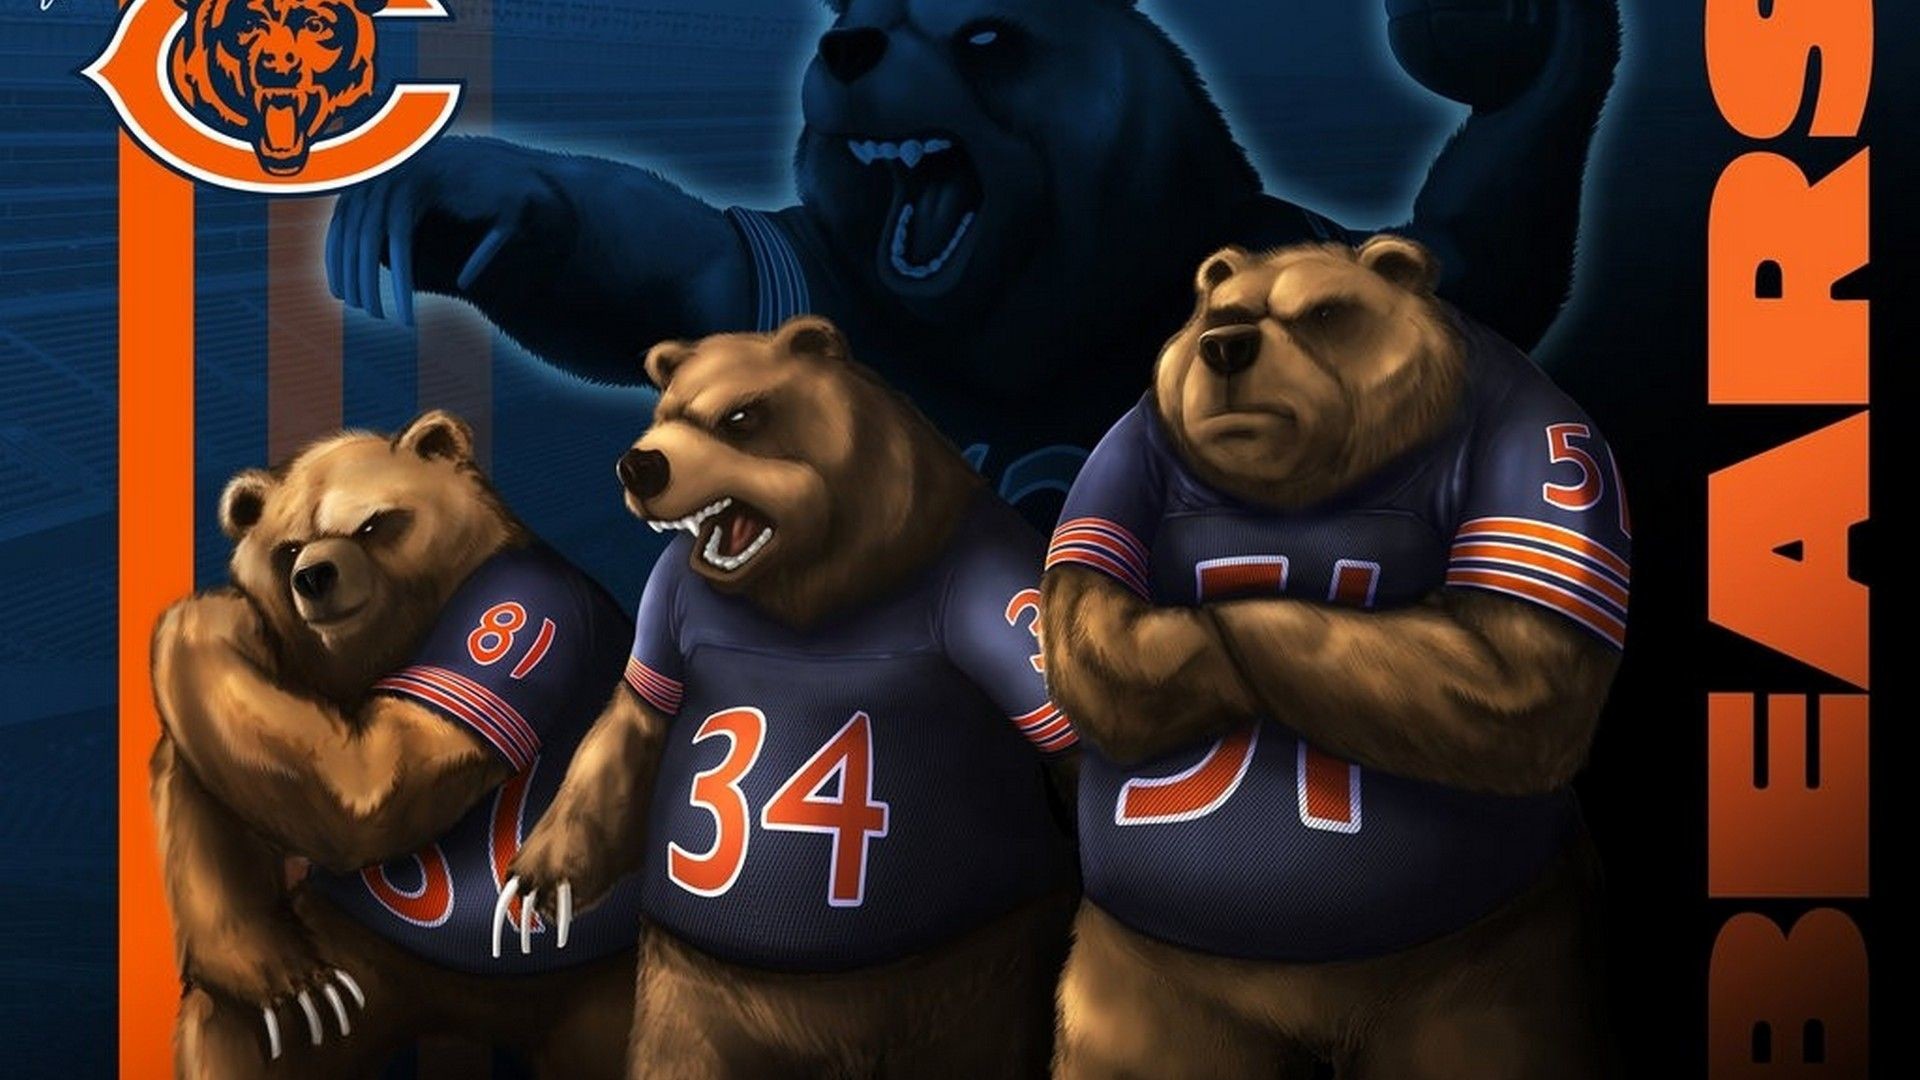 1920x1080 HD Backgrounds Chicago Bears | Best NFL Wallpapers